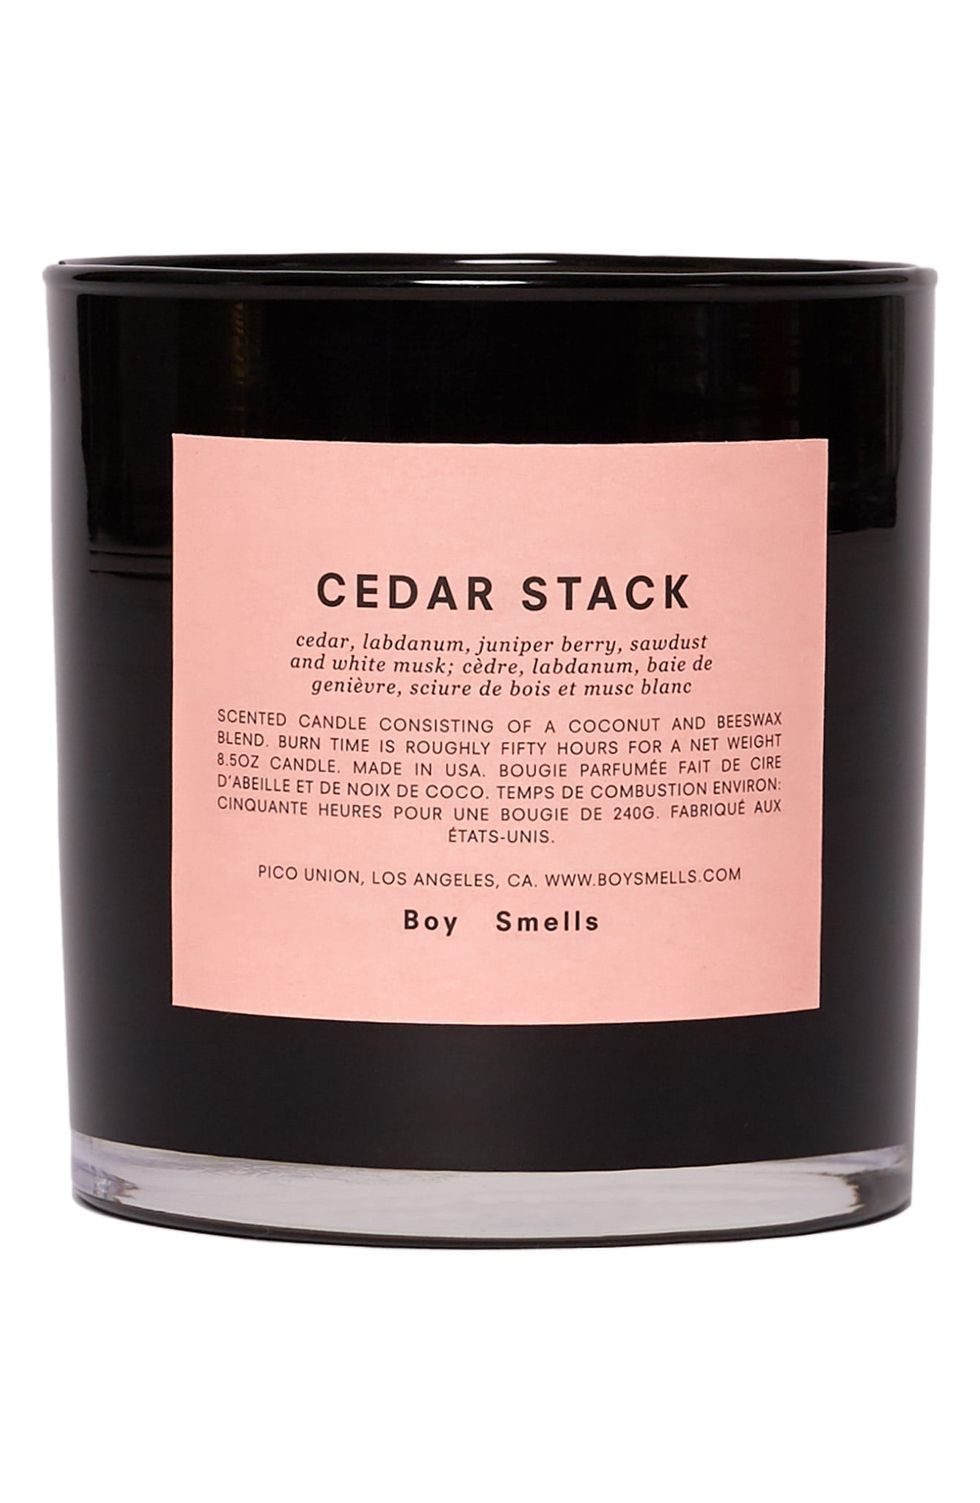 Cedar Stack Scented Candle